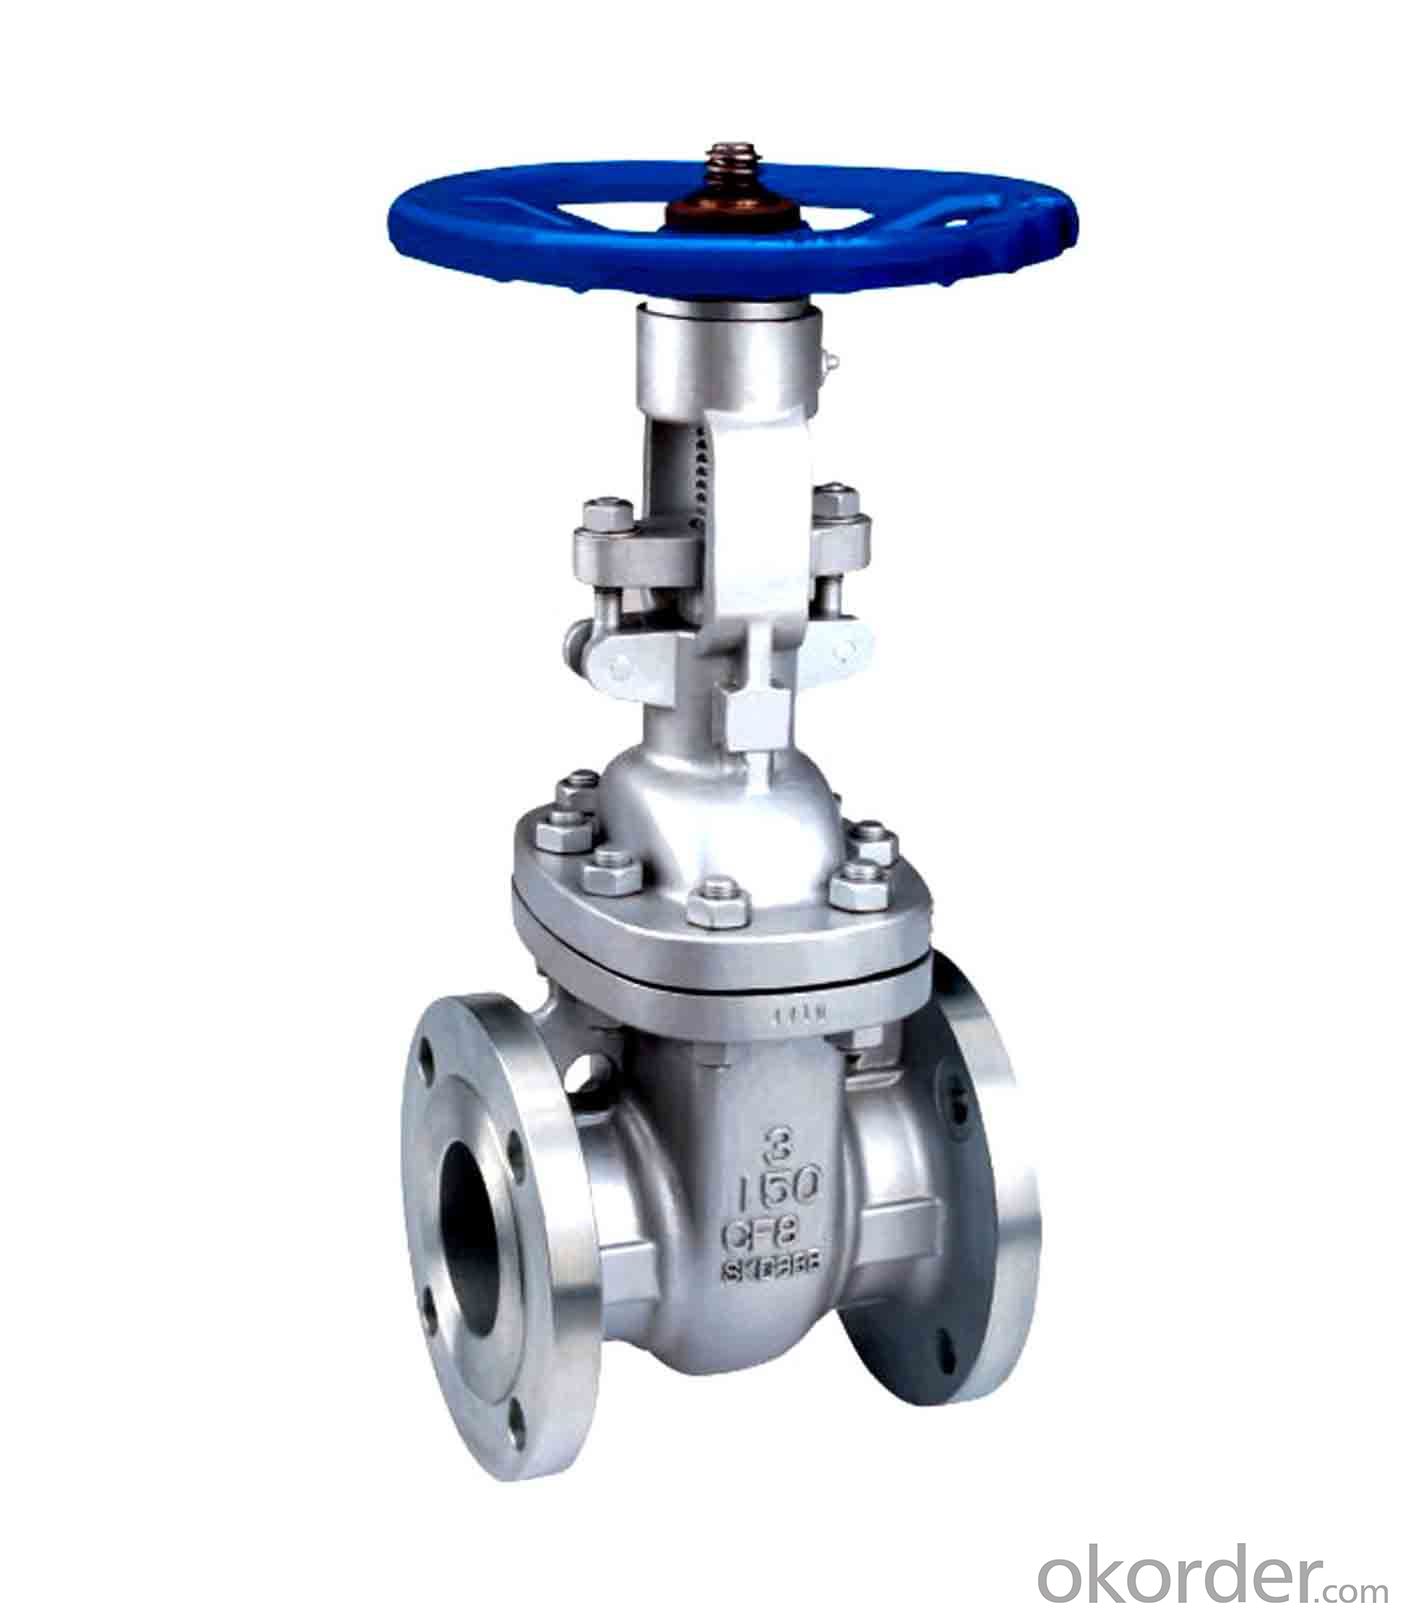 Gate Valve Non-rising Stem with Best Price and High Quality from China